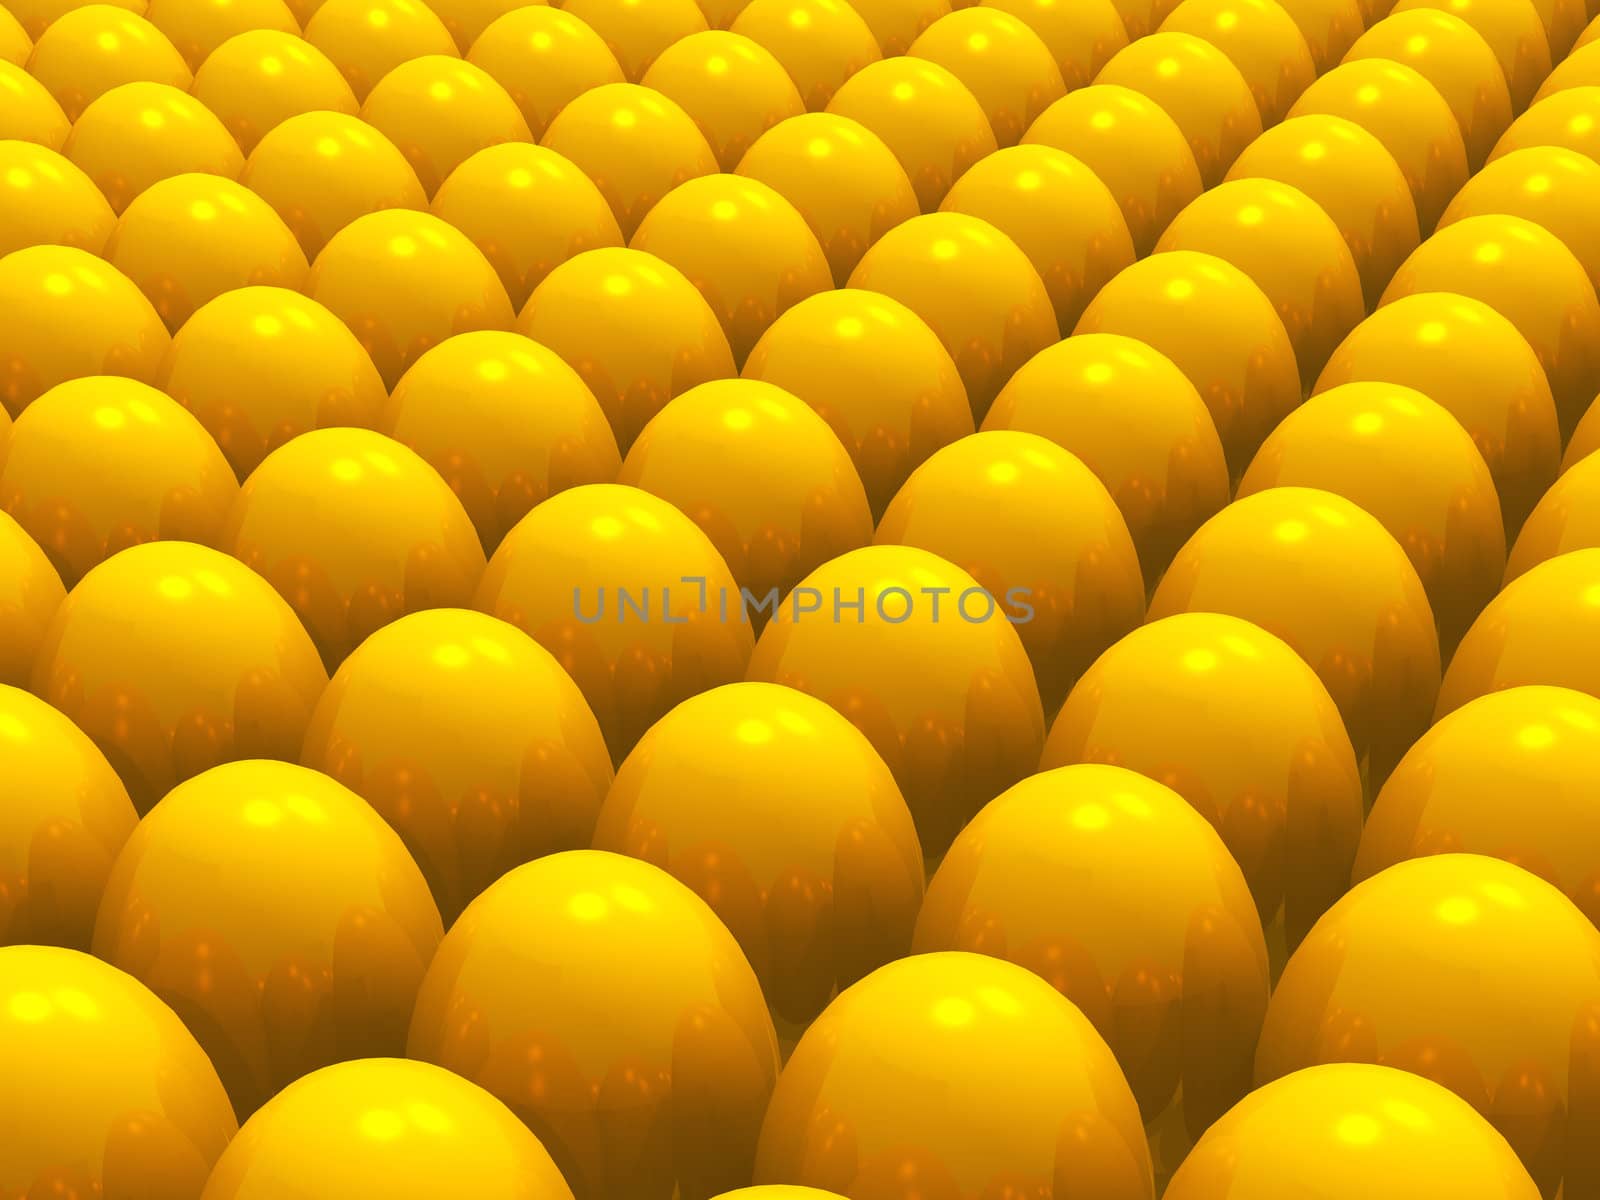 Many gold eggs from 100 % reflection of surrounding subjects